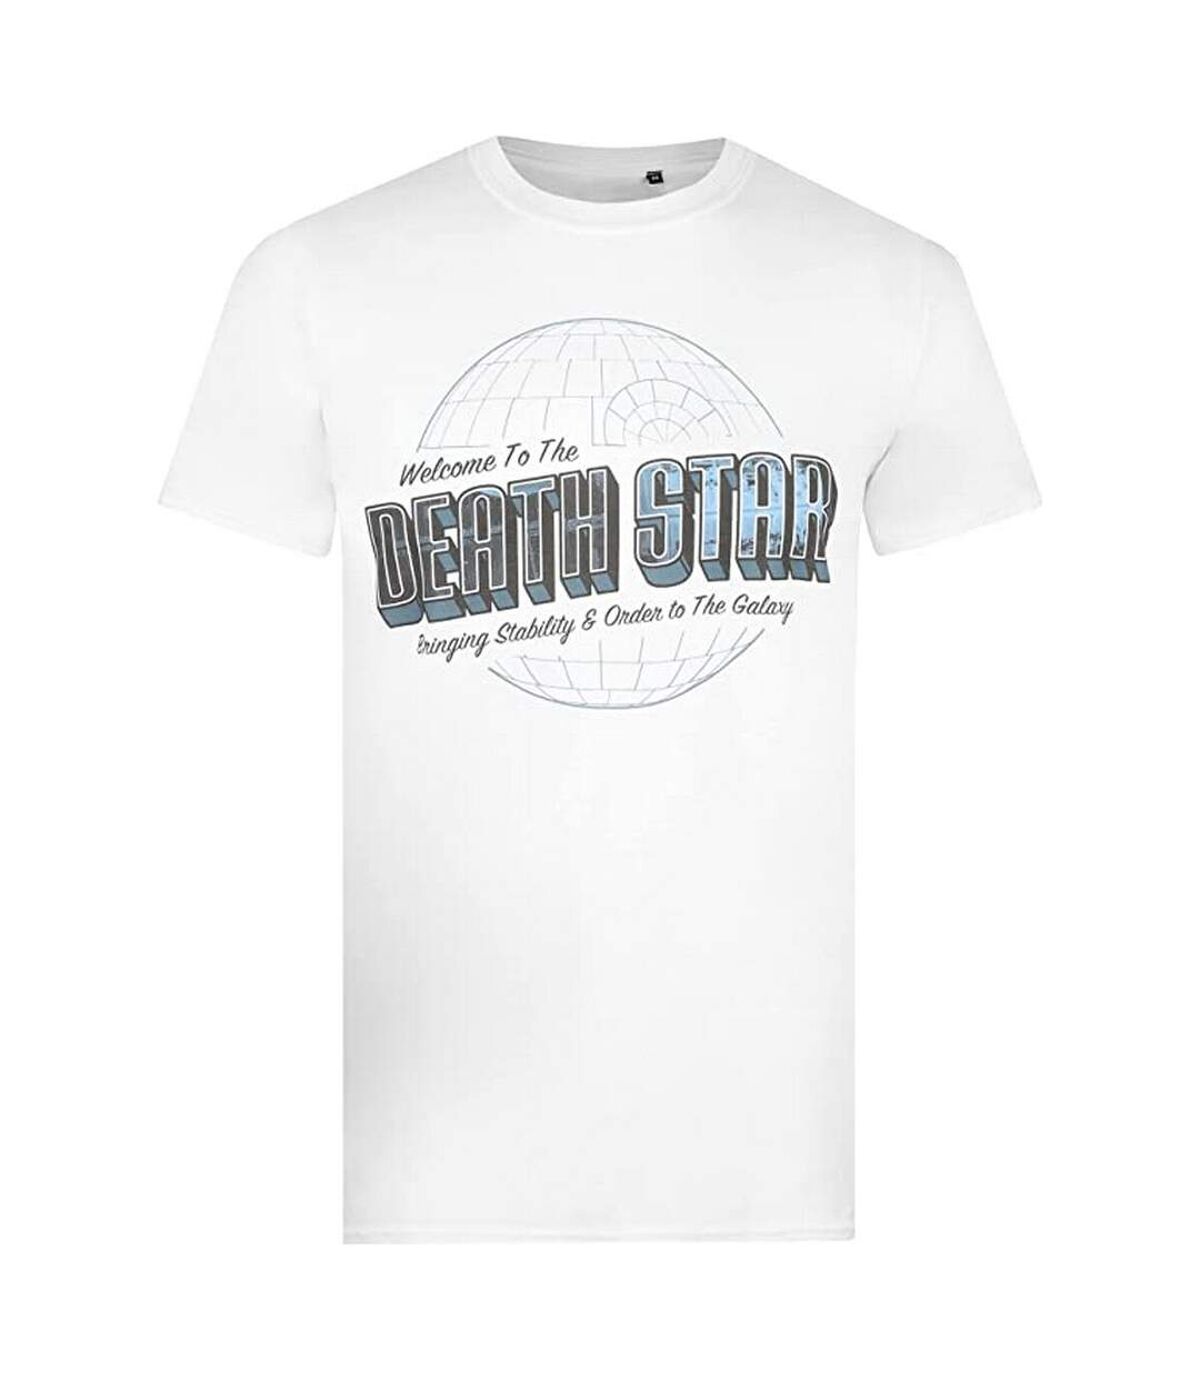 Star Wars - T-shirt WELCOME TO THE DEATH STAR - Homme (Blanc) - UTTV1299